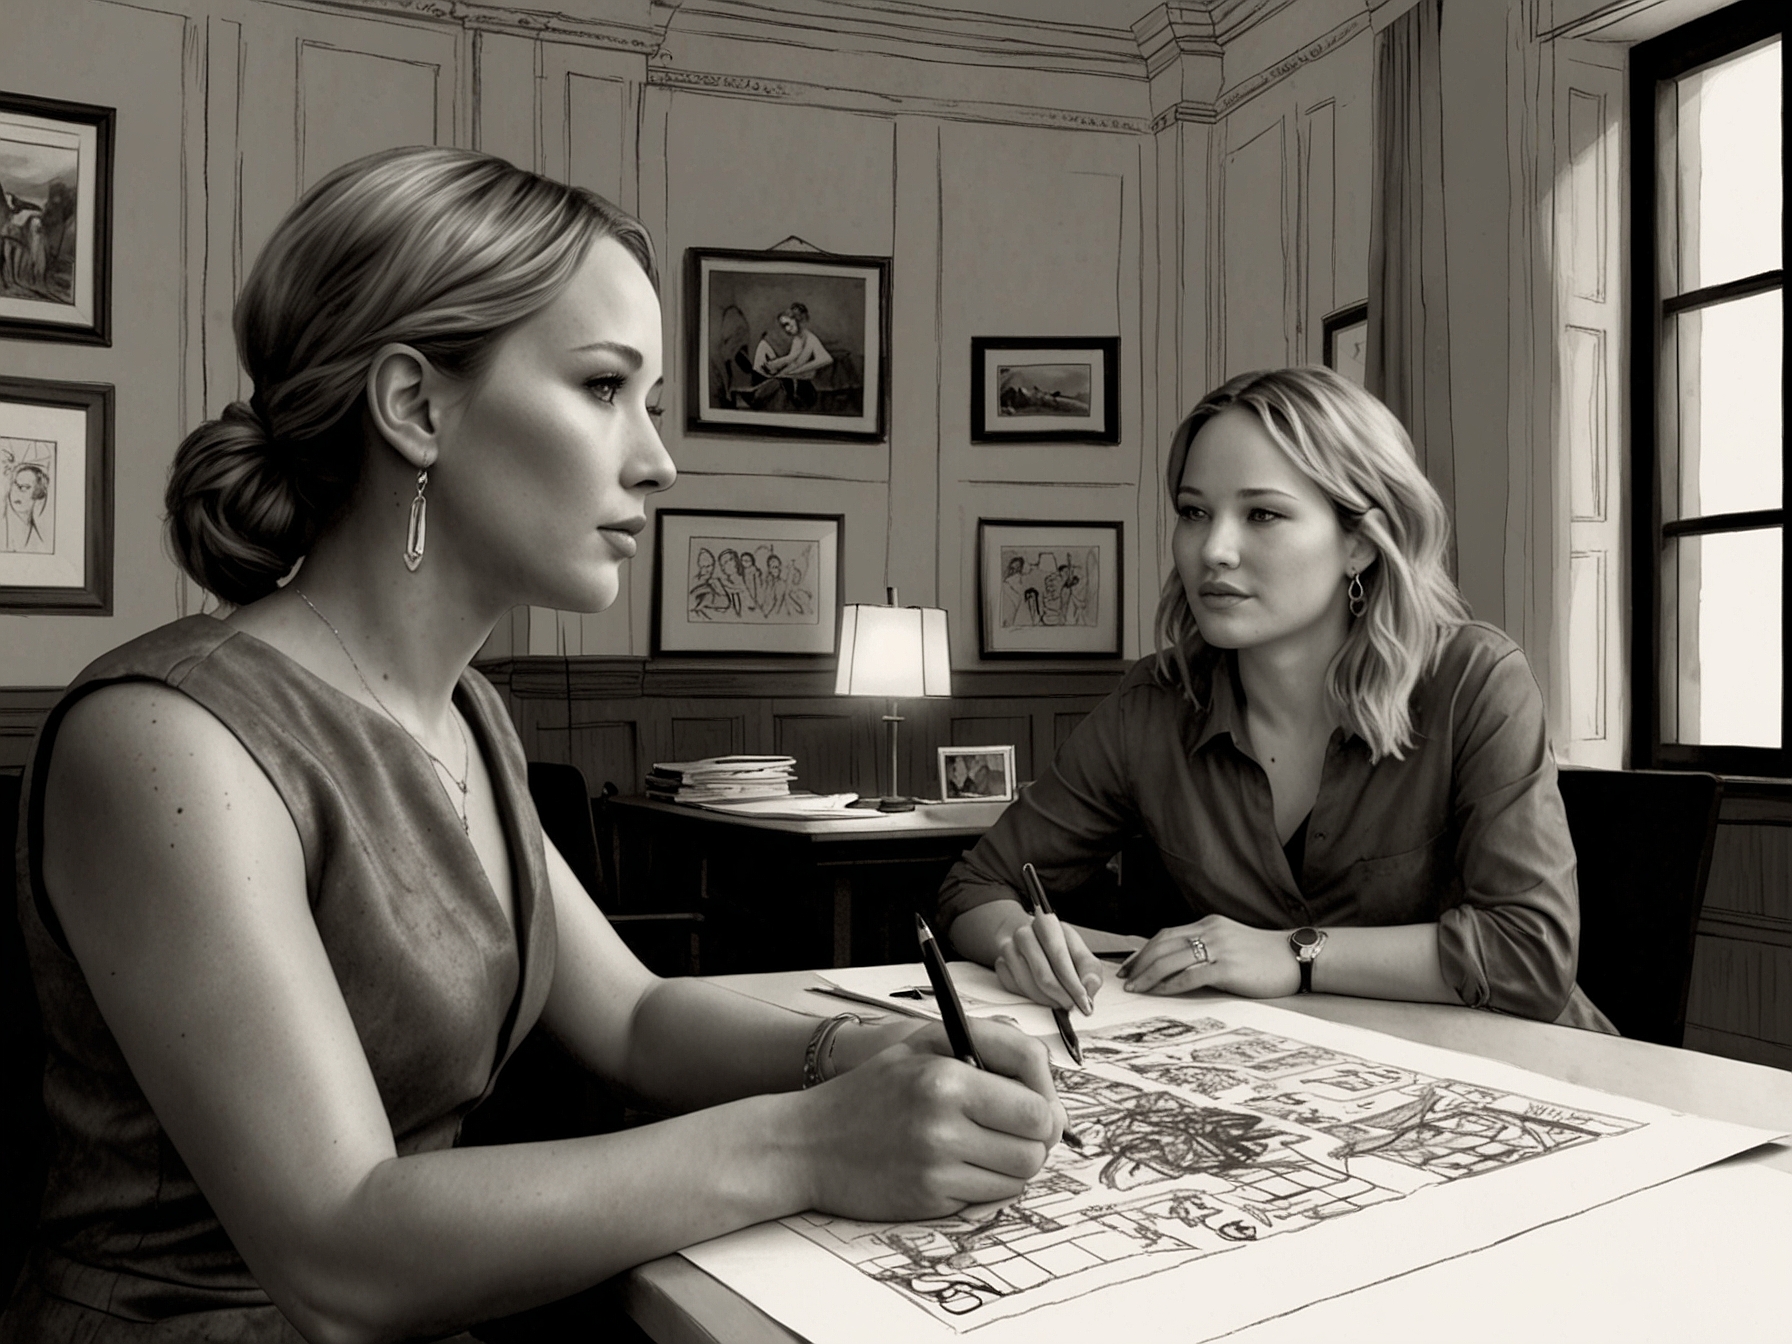 Jennifer Lawrence alongside Justine Ciarrocchi, her partner at Excellent Cadaver, collaborating in a production meeting for 'The Wives,' showcasing their strategic planning and commitment.